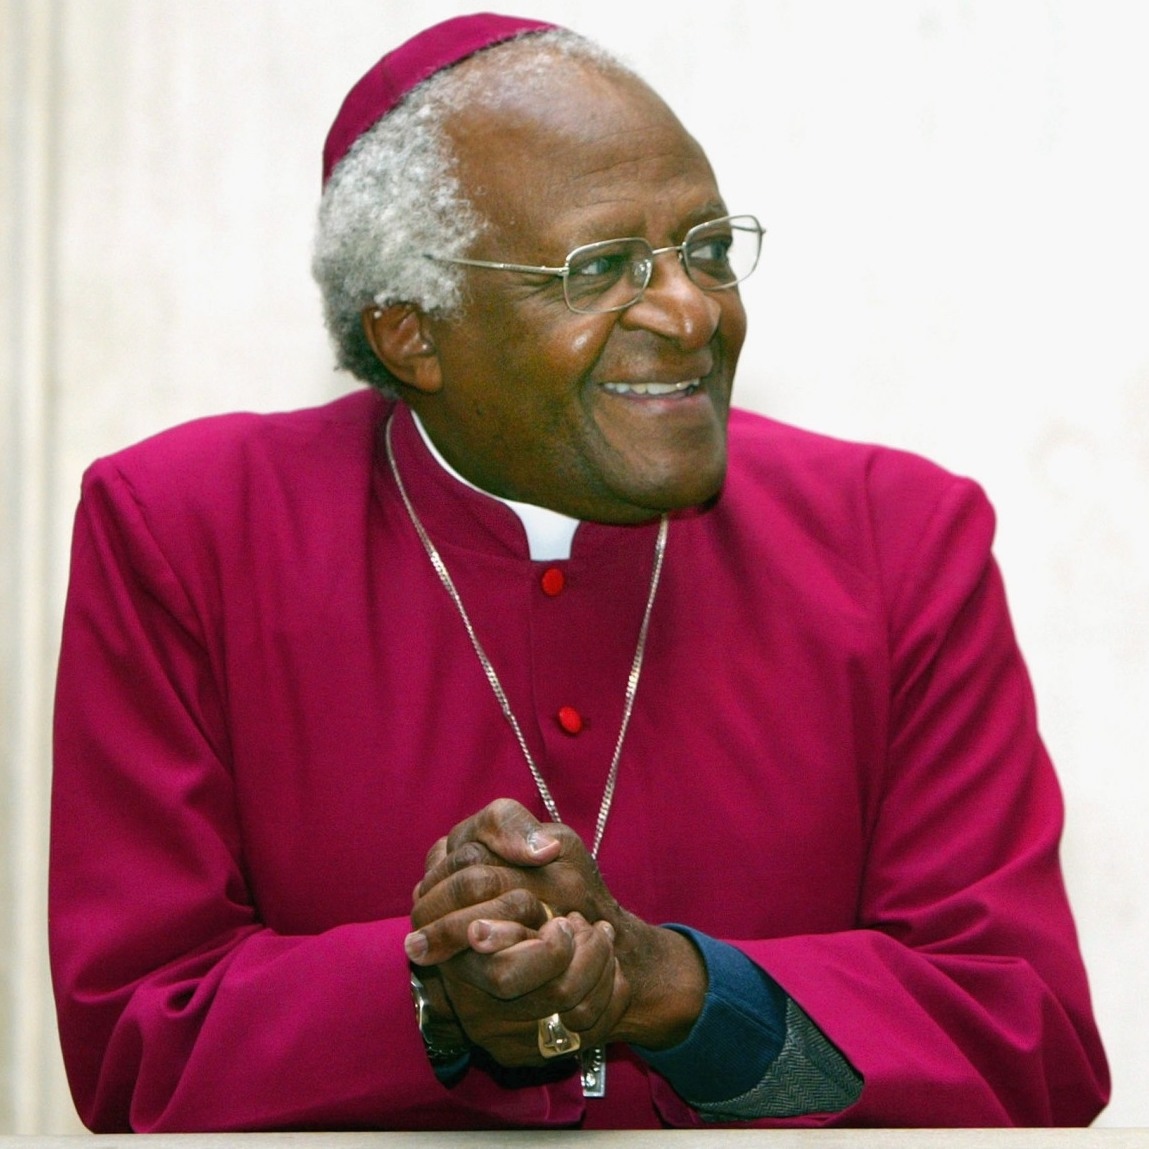 We are very sad to hear of the death of Desmond Tutu this week who said that Sir Stan was a great friend to South Africa during the apartheid years because he went into dangerous areas of Soweto to mentor young black players. They called him the 'black man with the white face'.